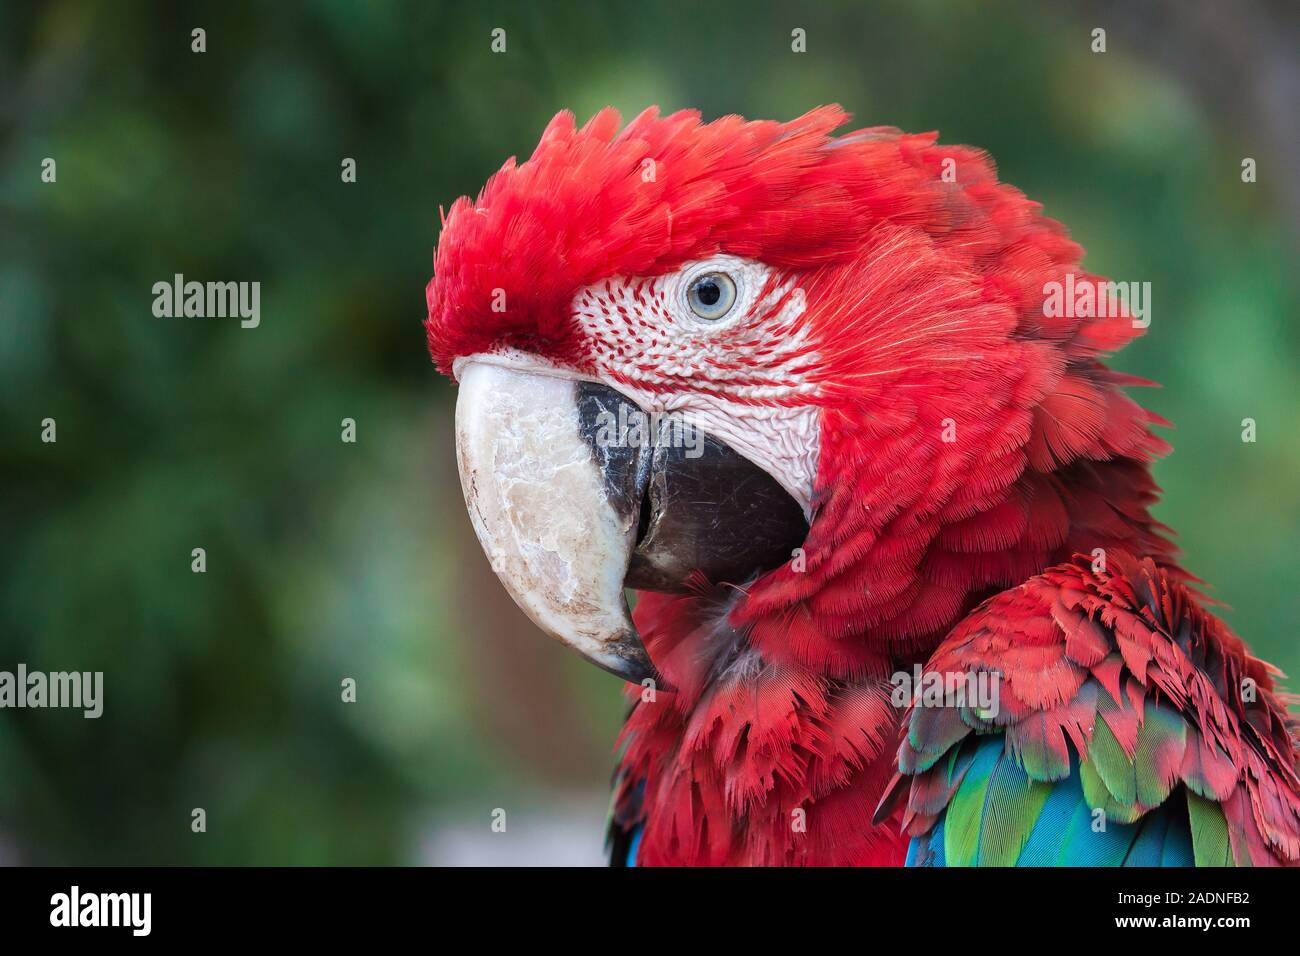 Colorful parakeet, parrot, cockatoo or macaw, typical of the tropics, and south america Stock Photo